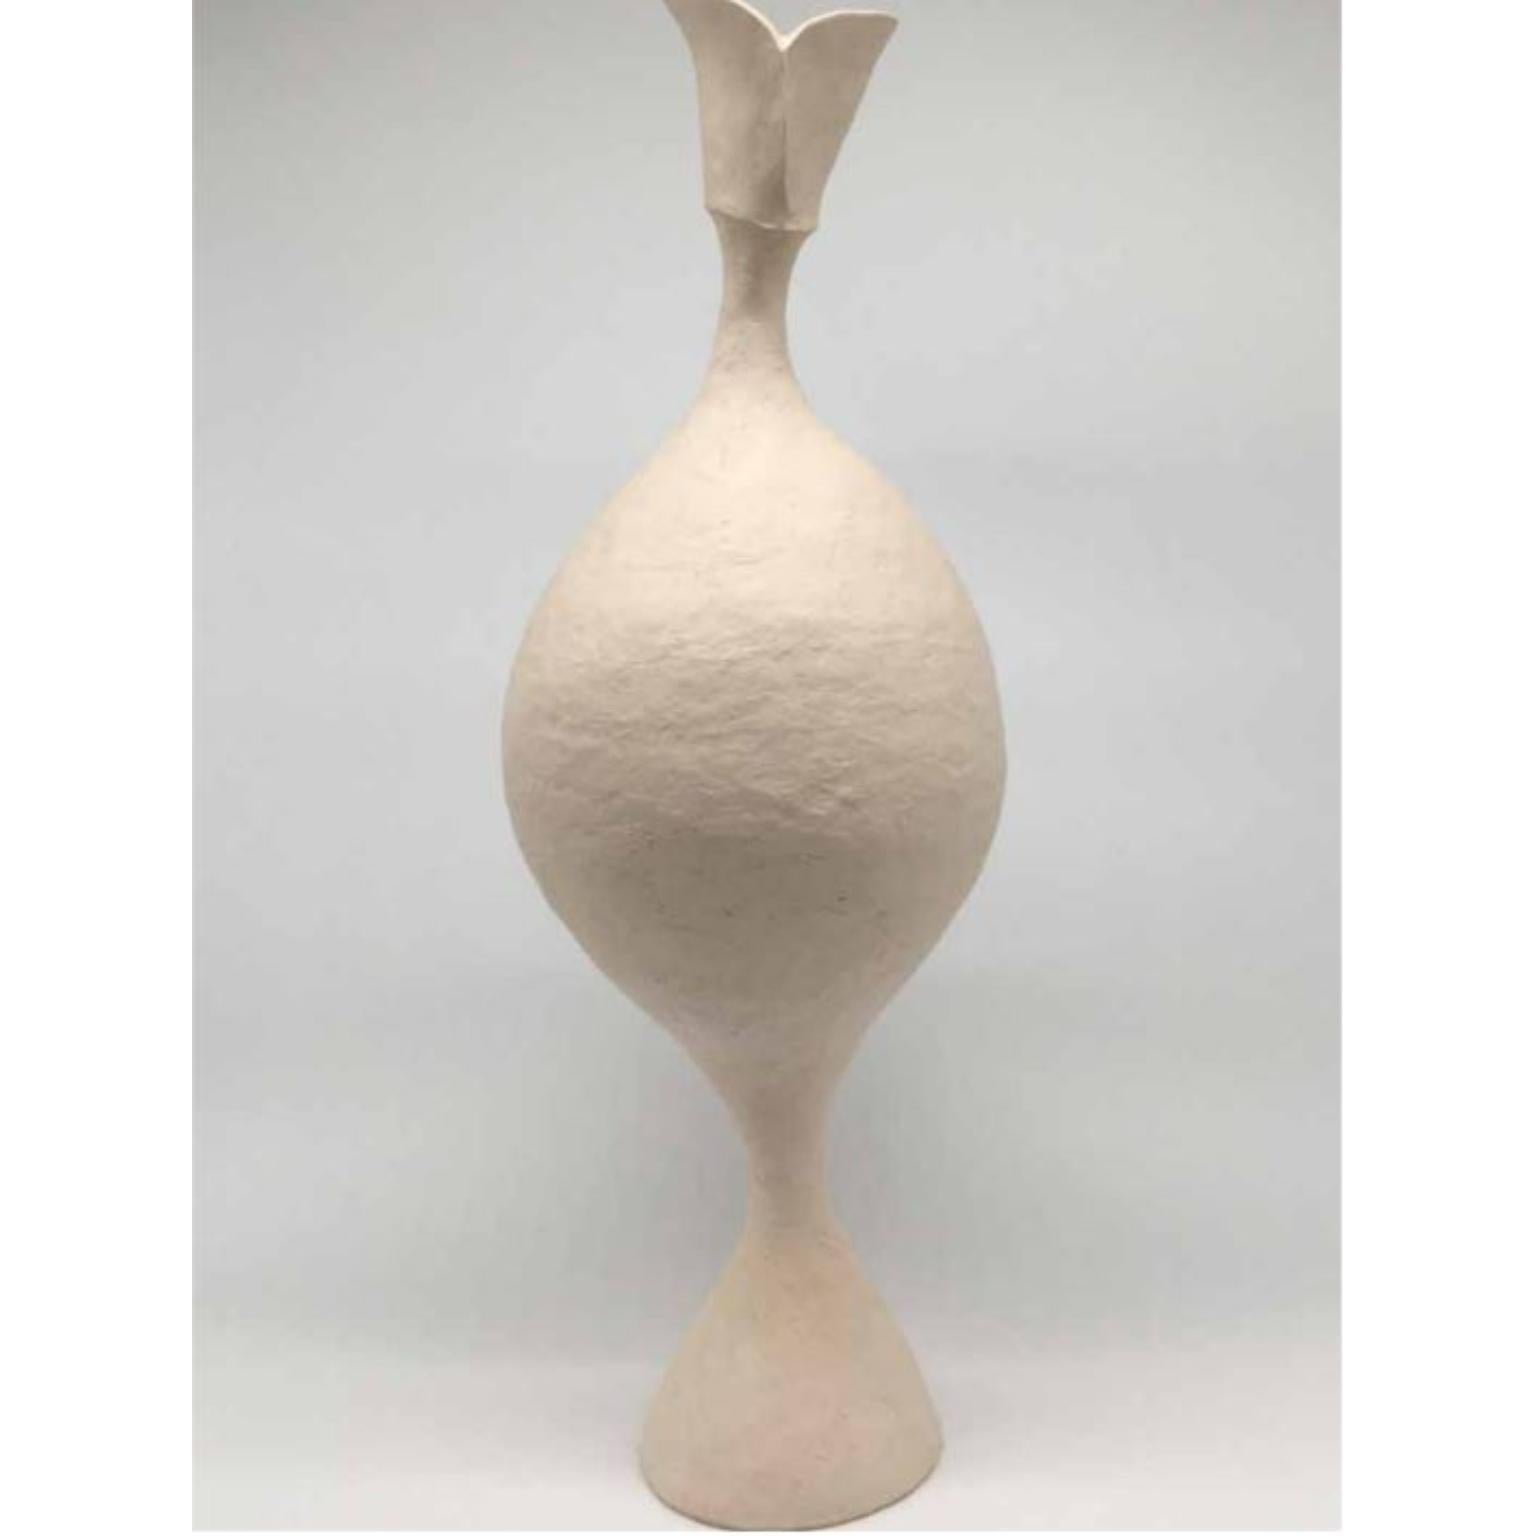 #2 Sculpture by Evamarie Pappas
Dimensions: D 16.51 x W 16.51 x H 50.16 cm
Materials: Stoneware.

This sculpture is incomplete. it will be fired once again with an underglaze.

For Evamarie Pappas, making art is a family affair. She lives and works